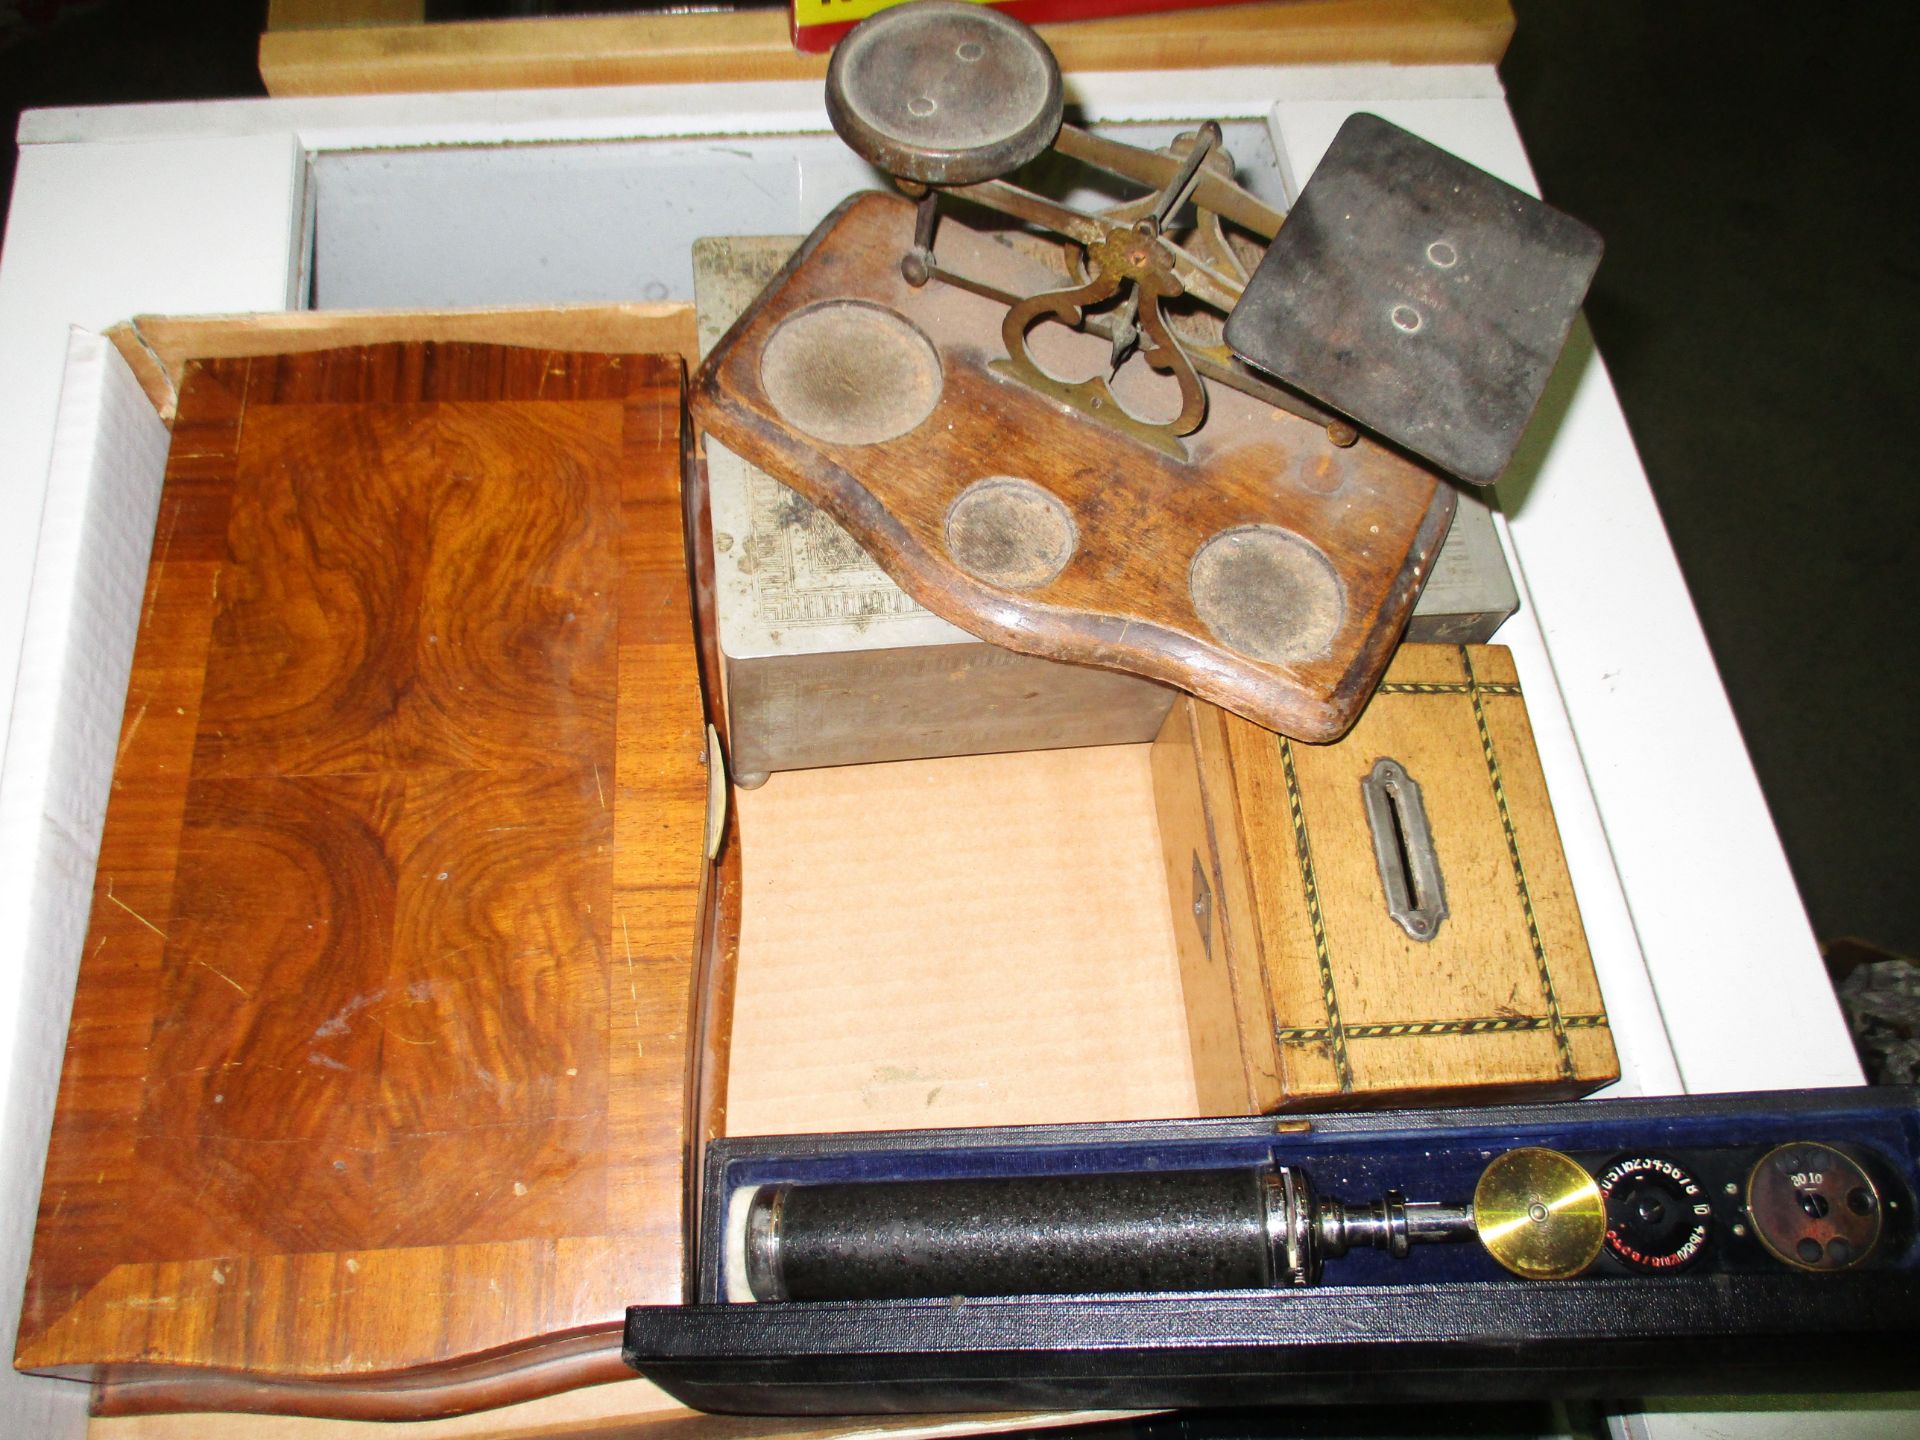 A pair of brass and wooden postal scales, a wooden money box, an optical tool, a wooden box,